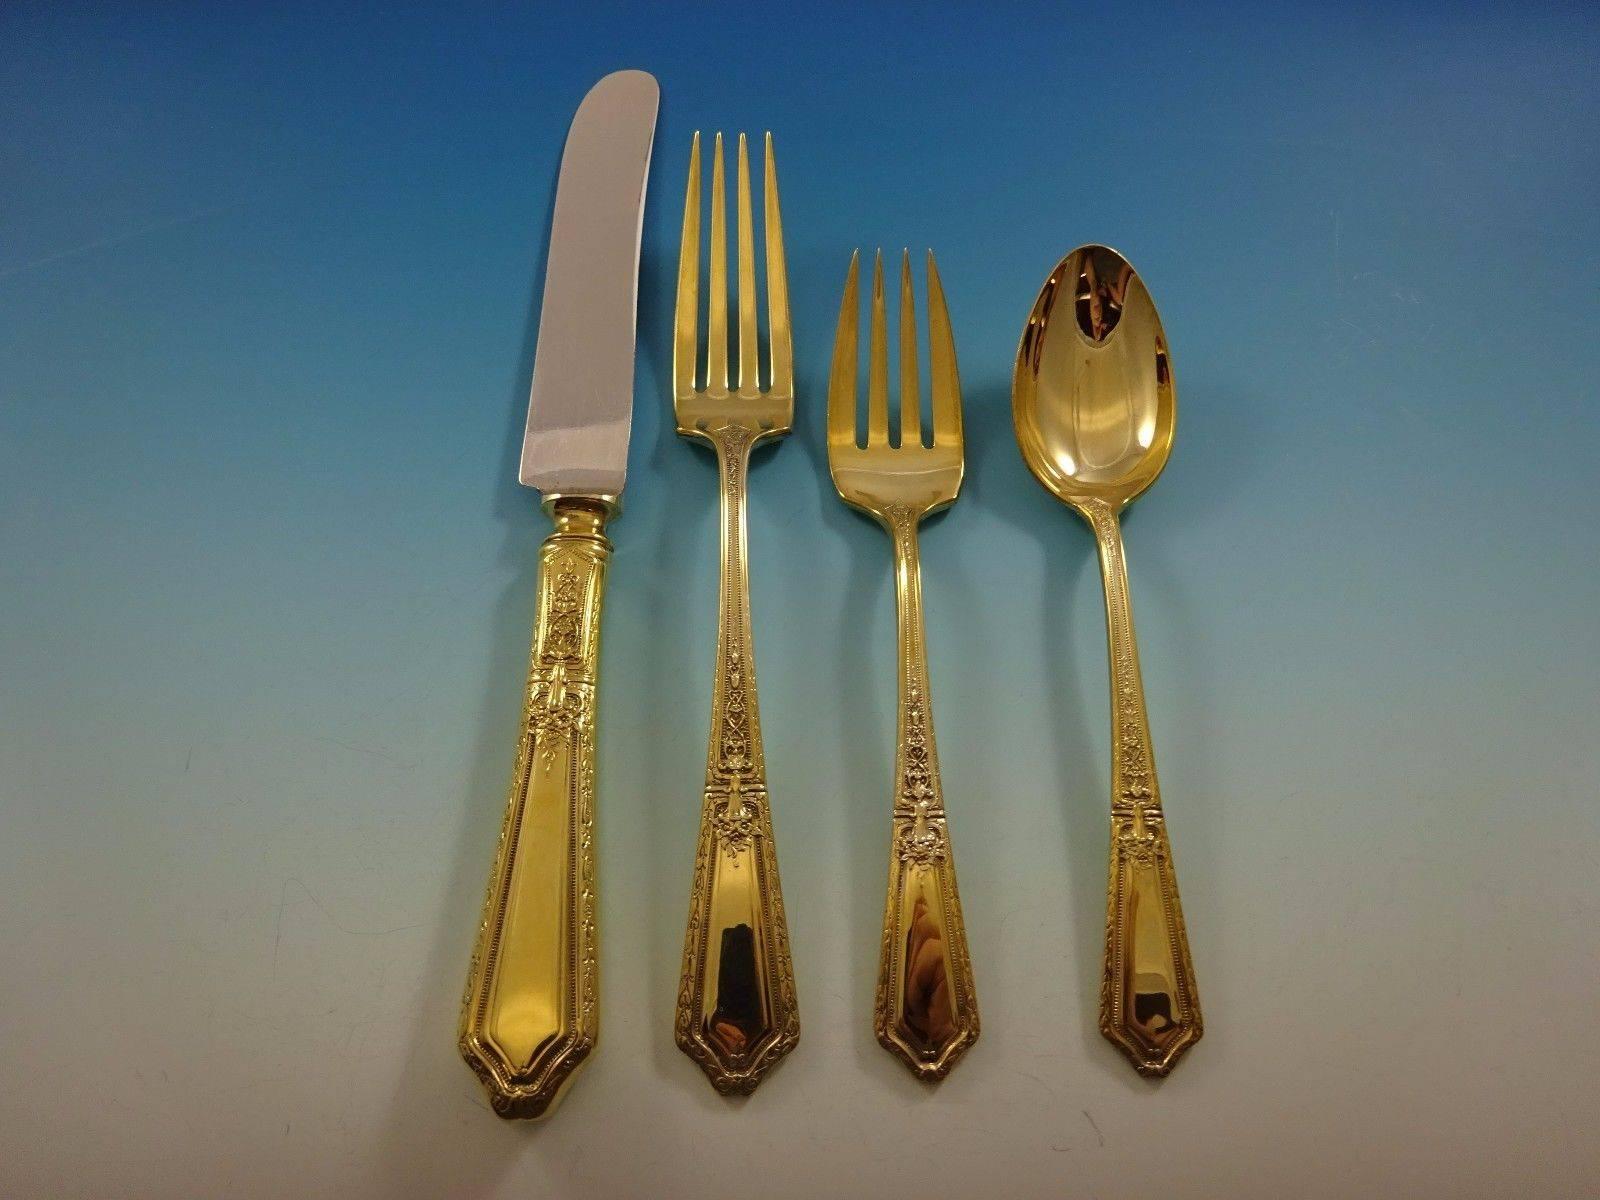 D'Orleans Gold by Towle sterling Silver flatware set - 32 pieces. Gold flatware is on trend and makes a bold statement on your table. This set is vermeil (completely gold-washed) and includes: 

Eight Knives, 9